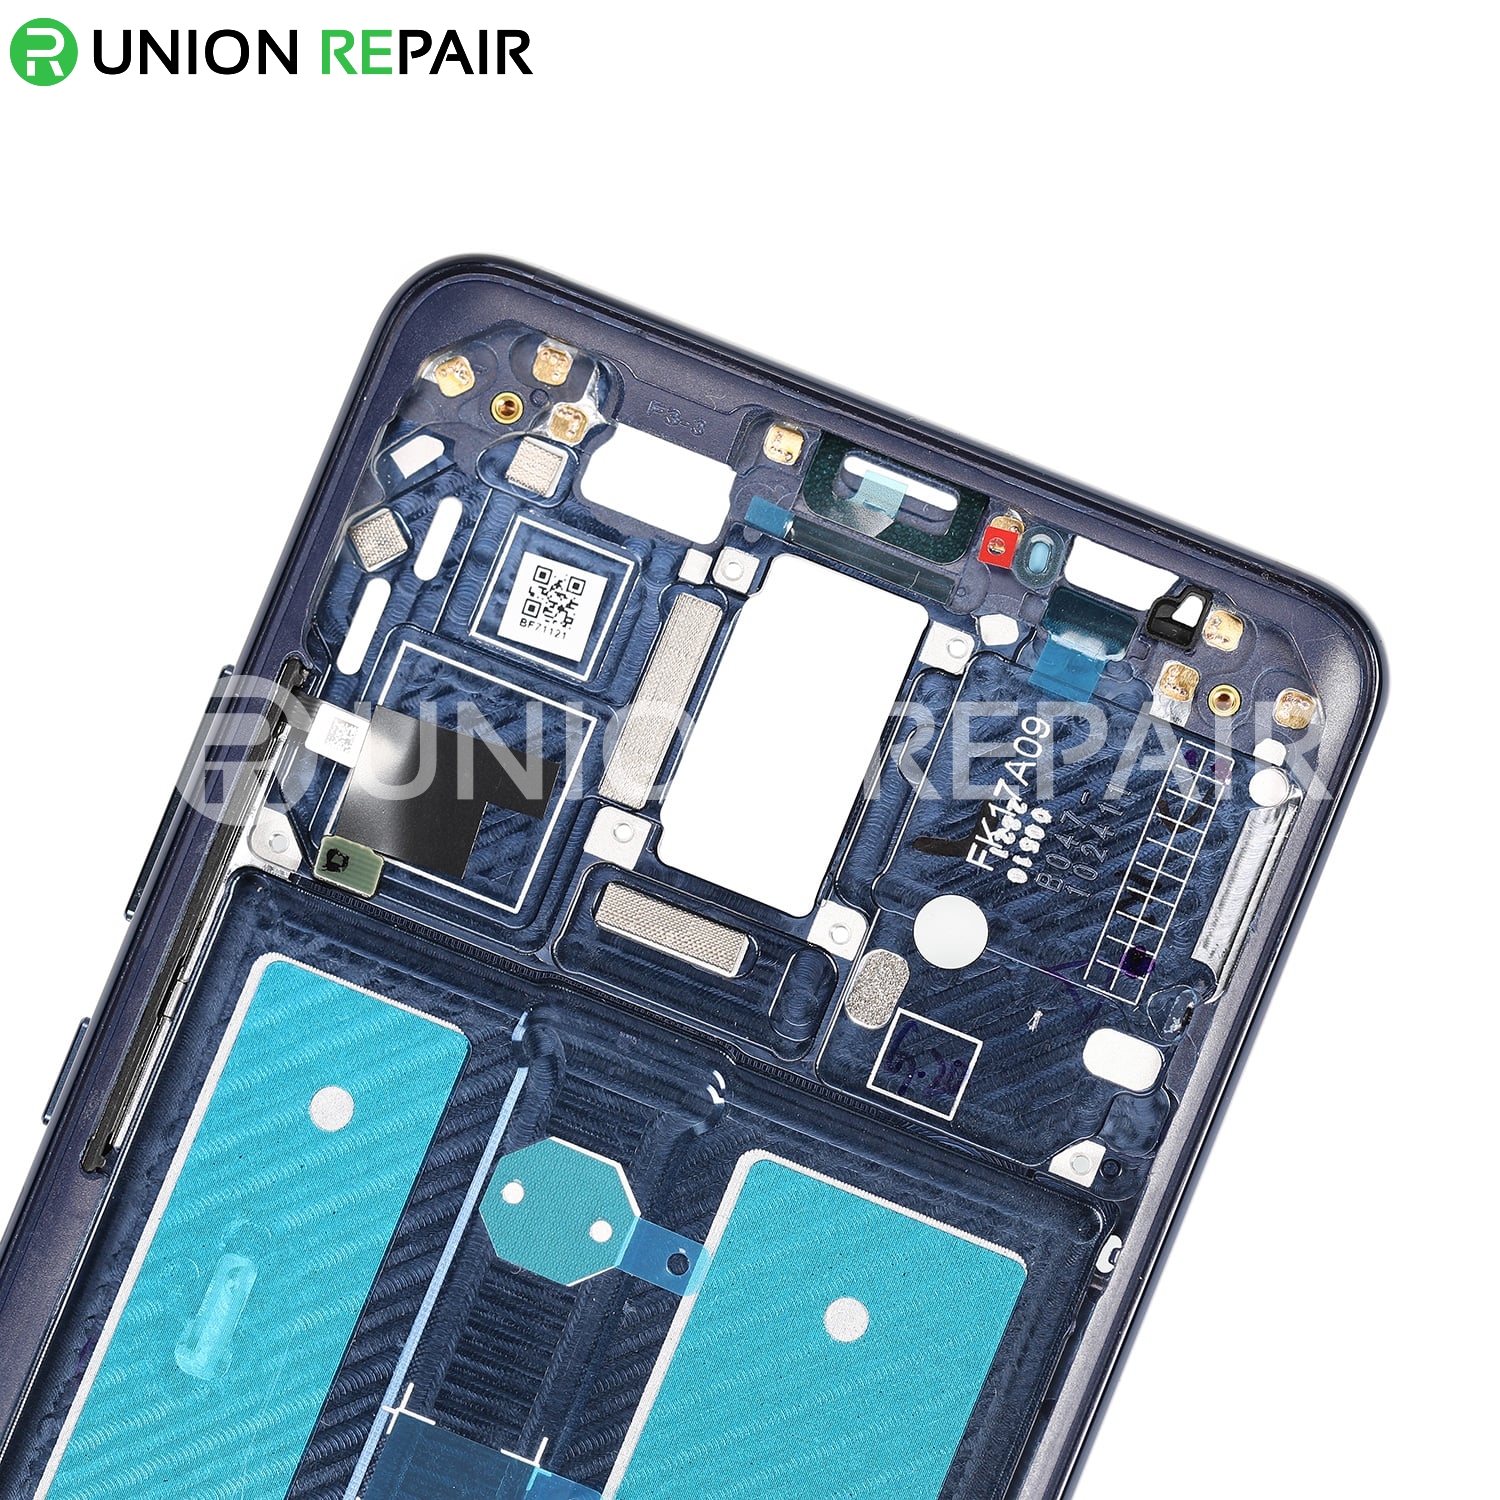 Replacement for Huawei Mate 10 Pro Front Housing LCD Frame Bezel Plate - Midnight Blue